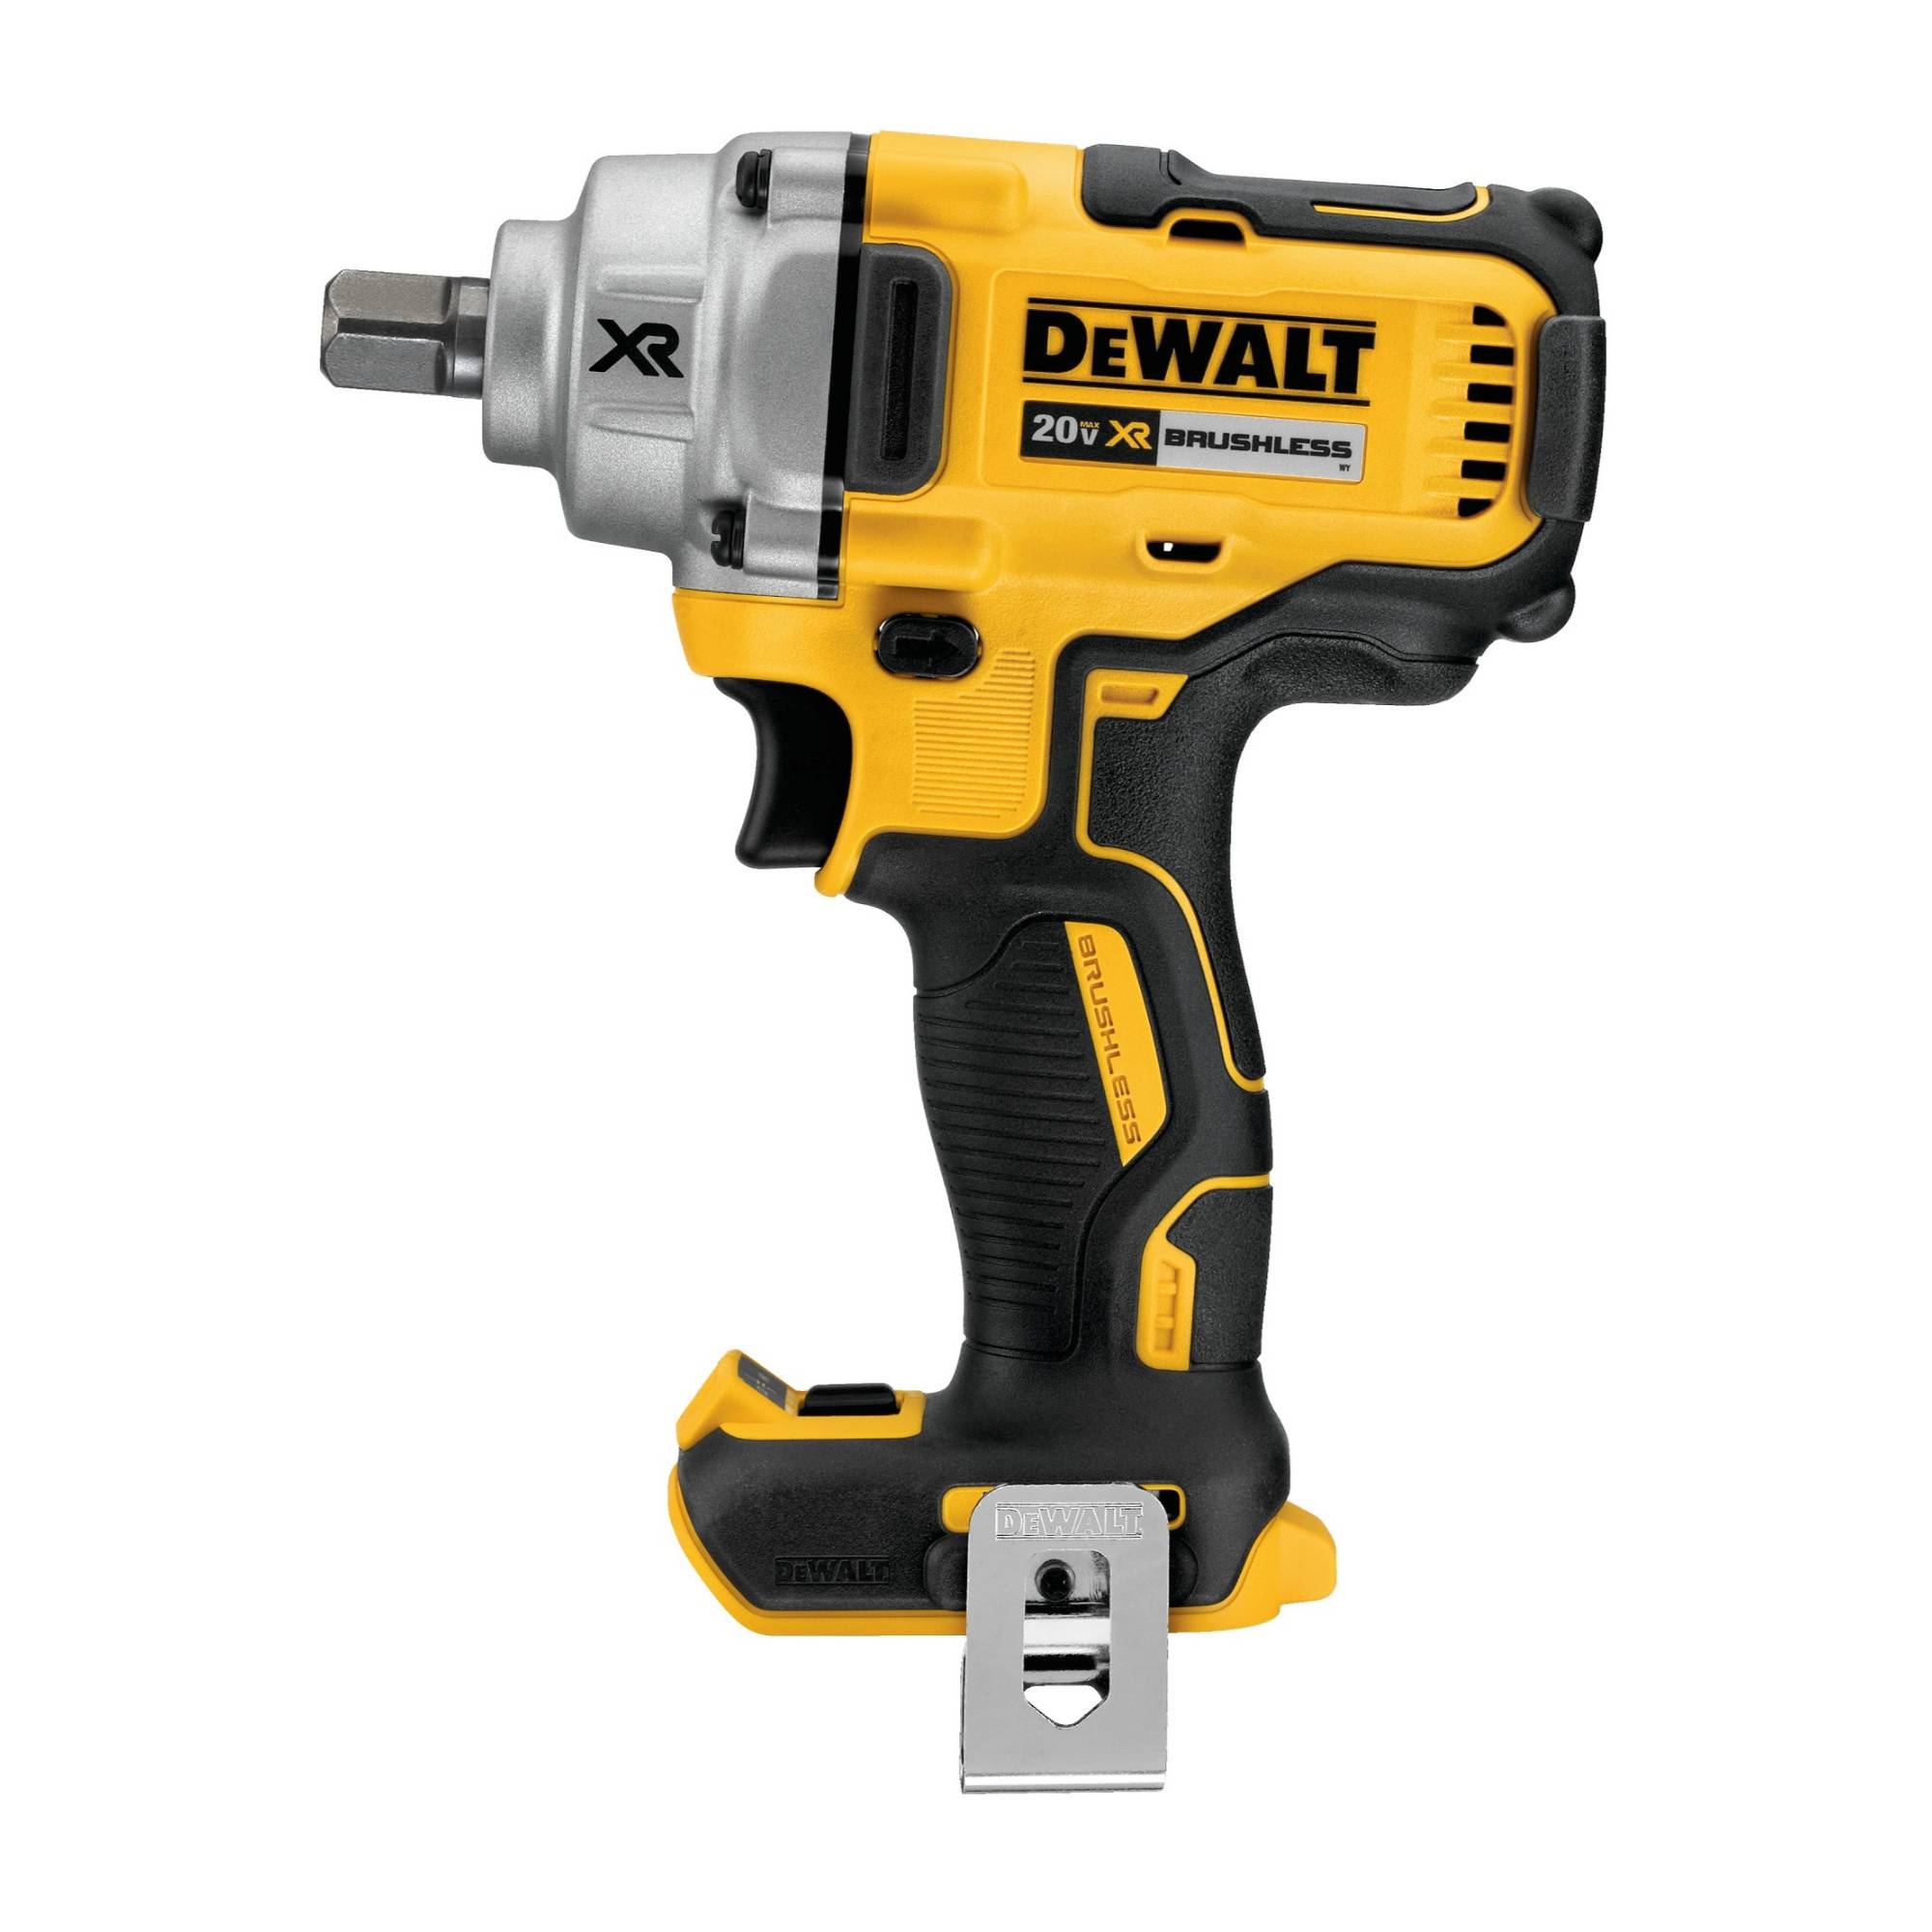 Dewalt DCF894B 20V Max XR 1/2 inch Mid-Range Cordless Impact Wrench with Detent Pin Anvil